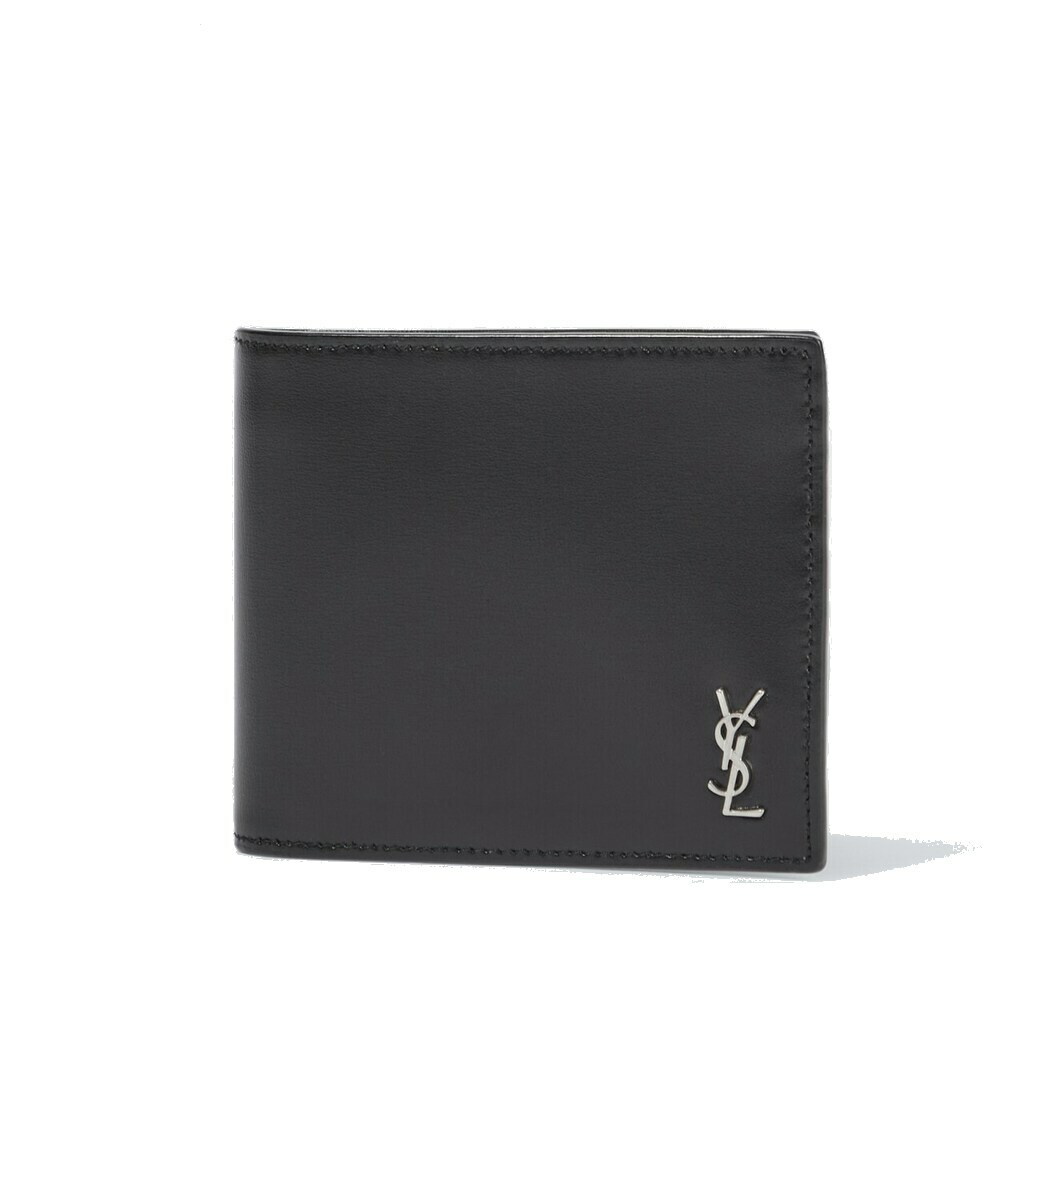 Off-White c/o Virgil Abloh Jitney Mini Compact Wallet Nude No Colo in White